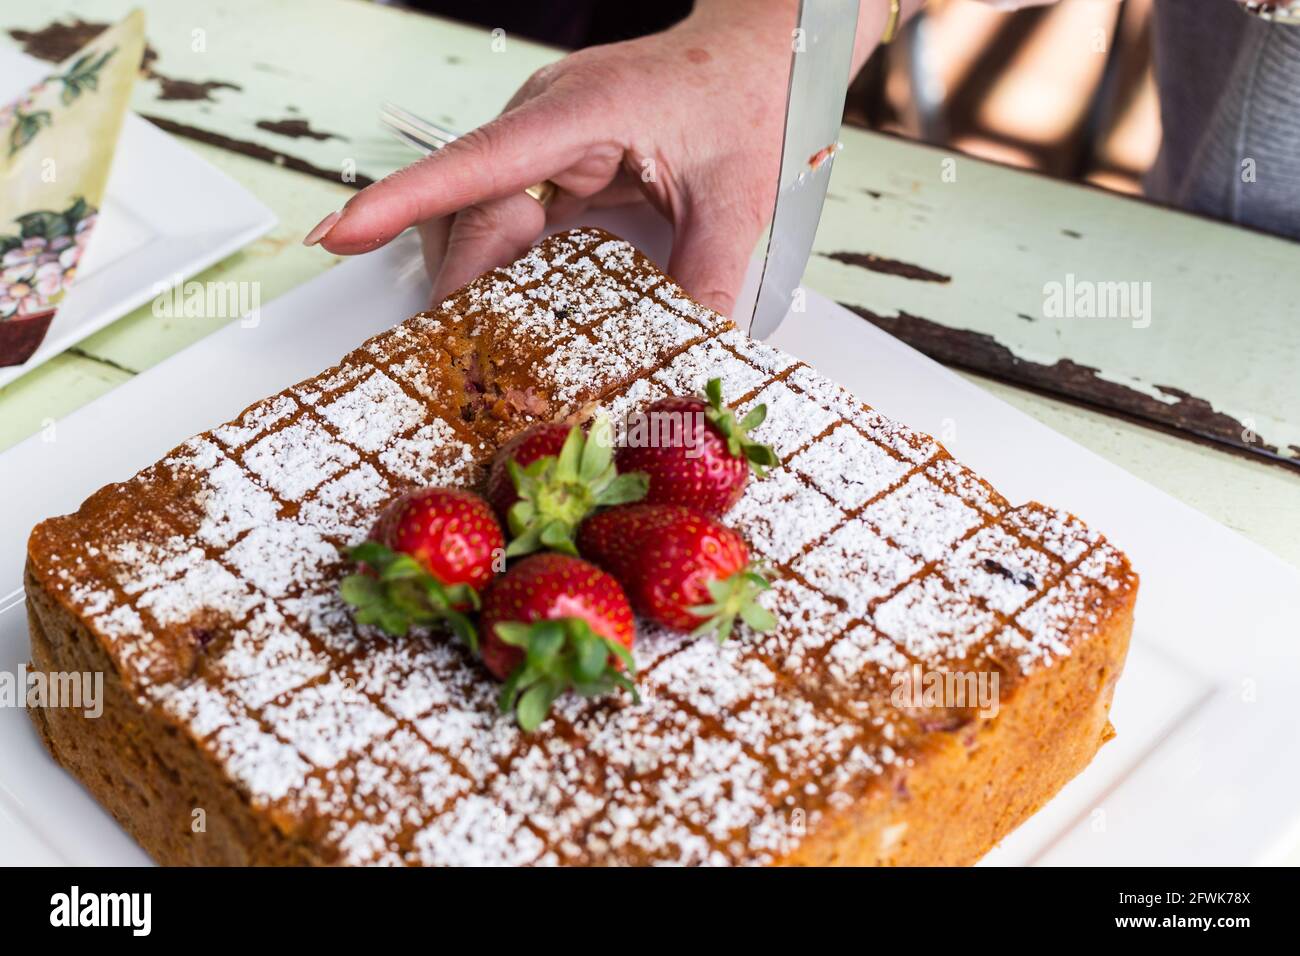 Lady cutting cake with icing sugar and strawberries on top Stock Photo